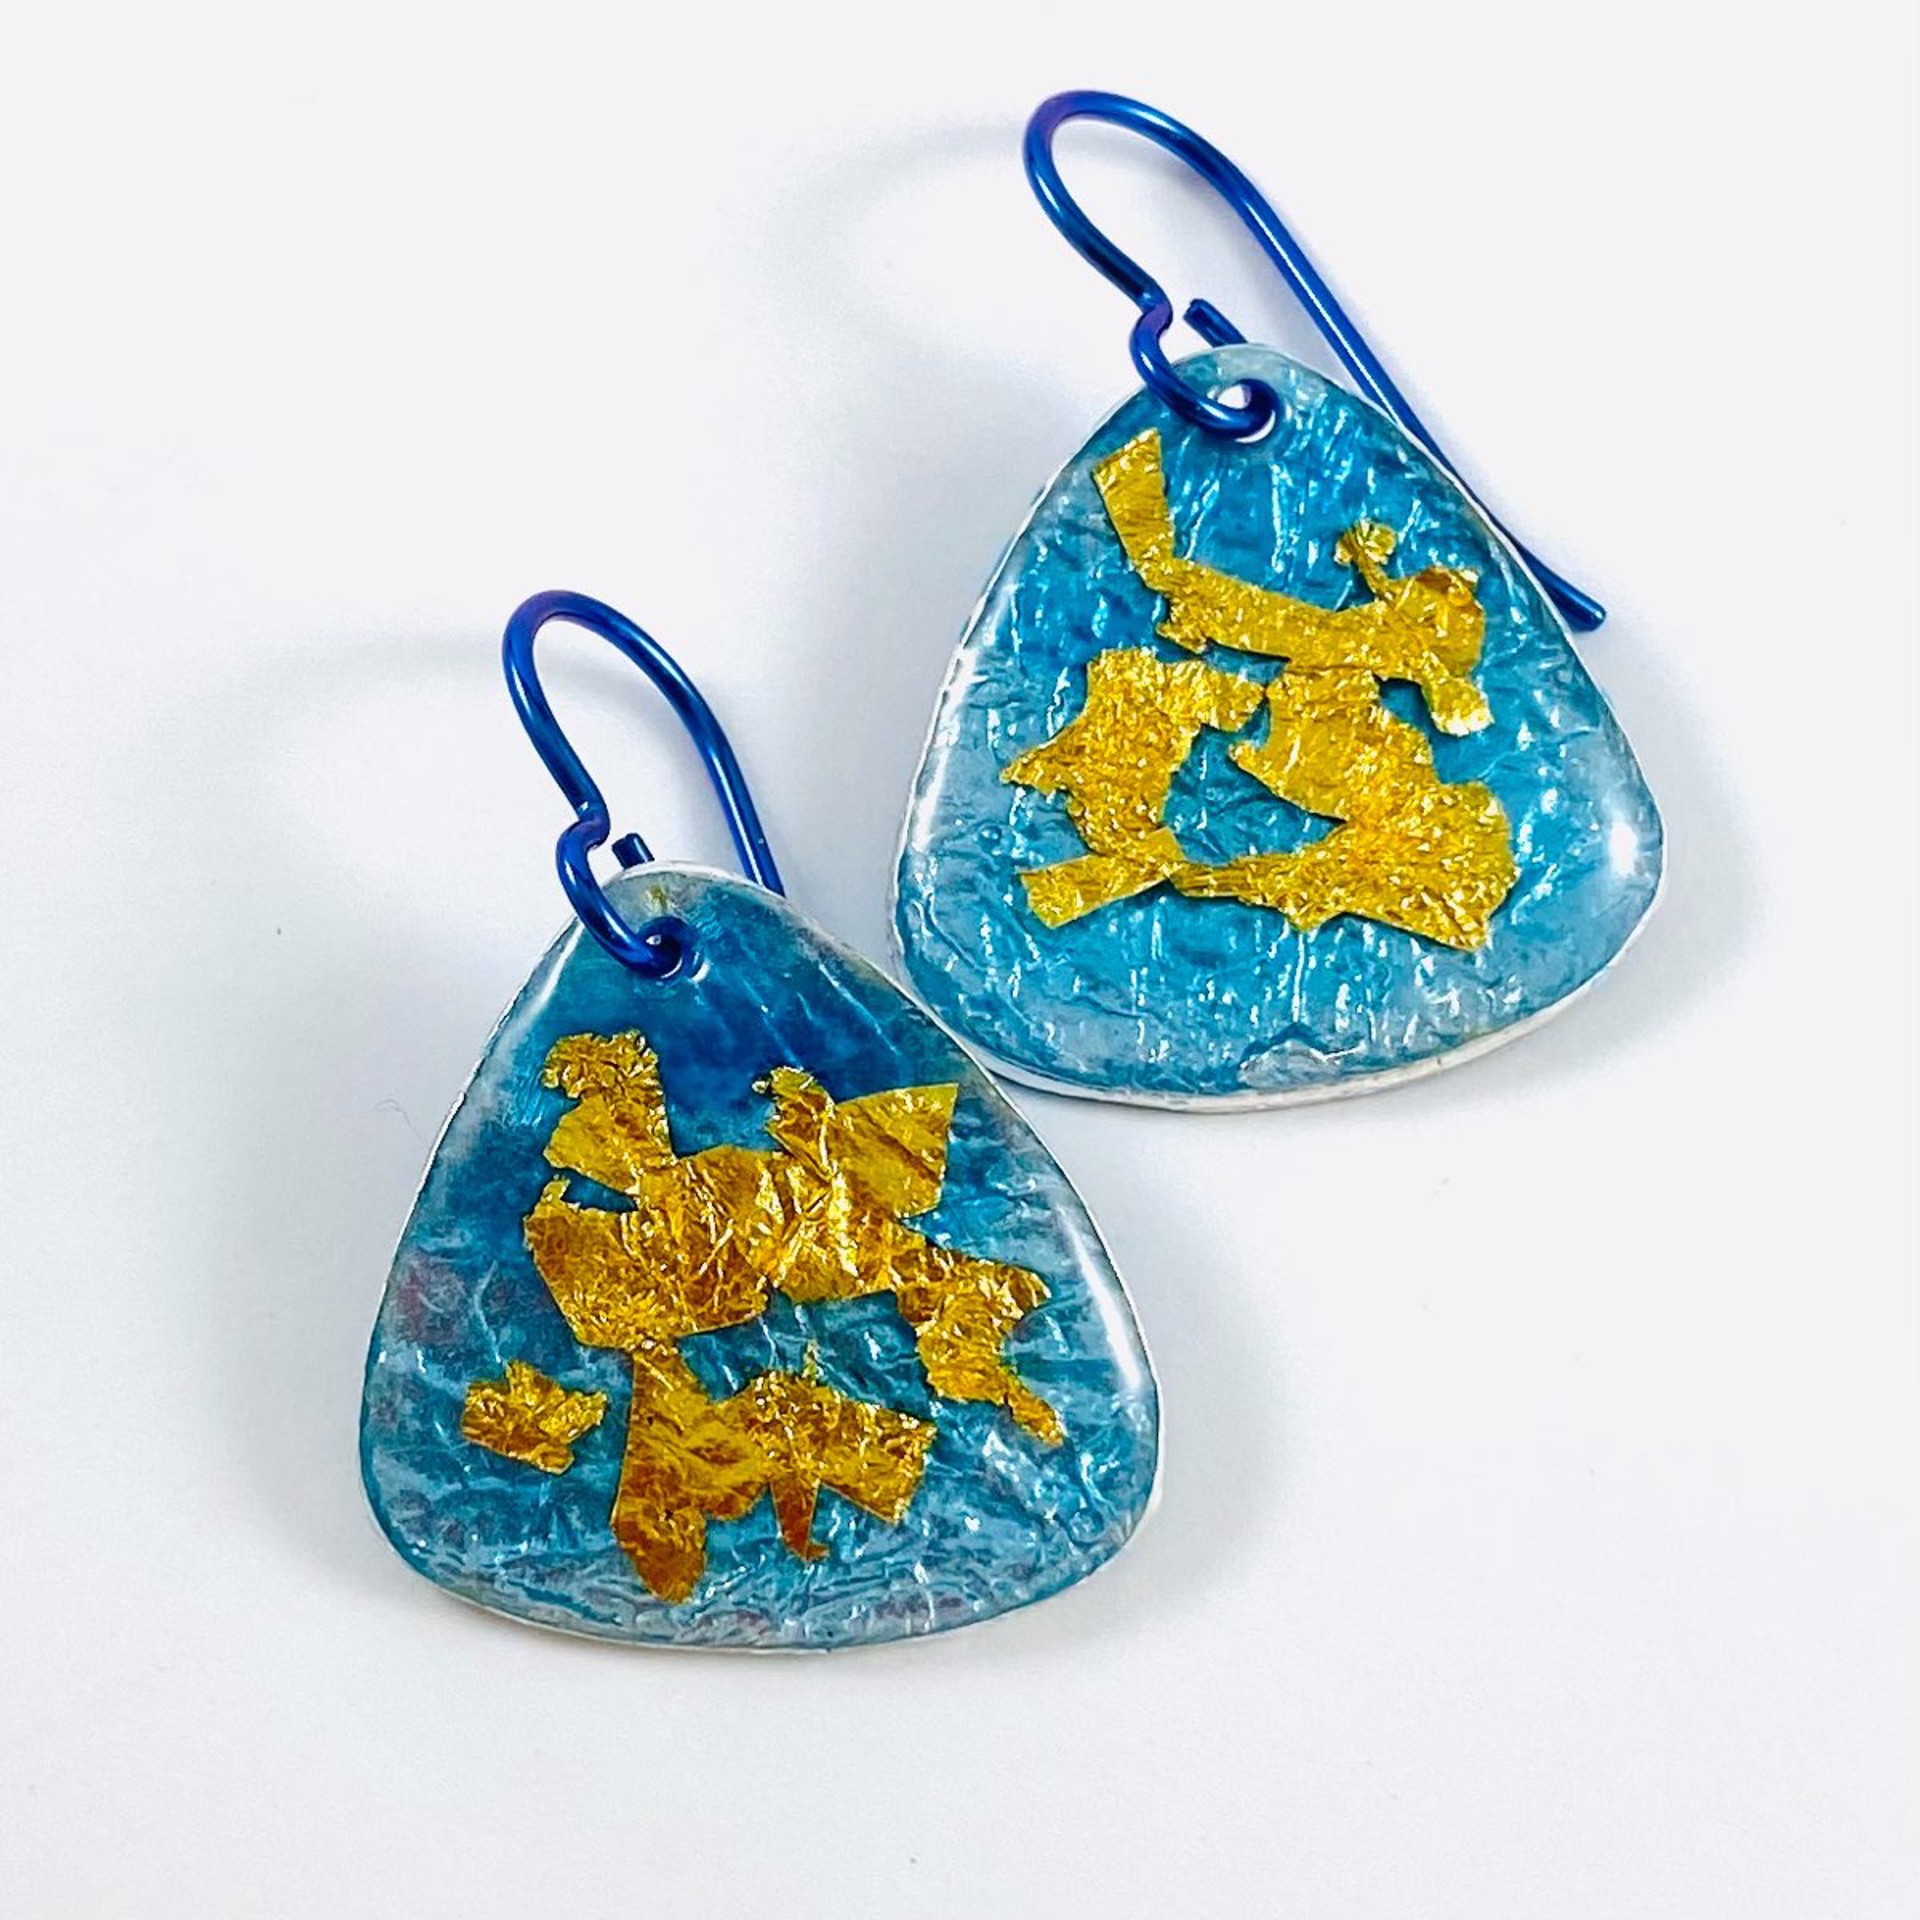 Rounded Triangle  Blue and Gold Vitreous Enamel Earrings by Karen Hakim